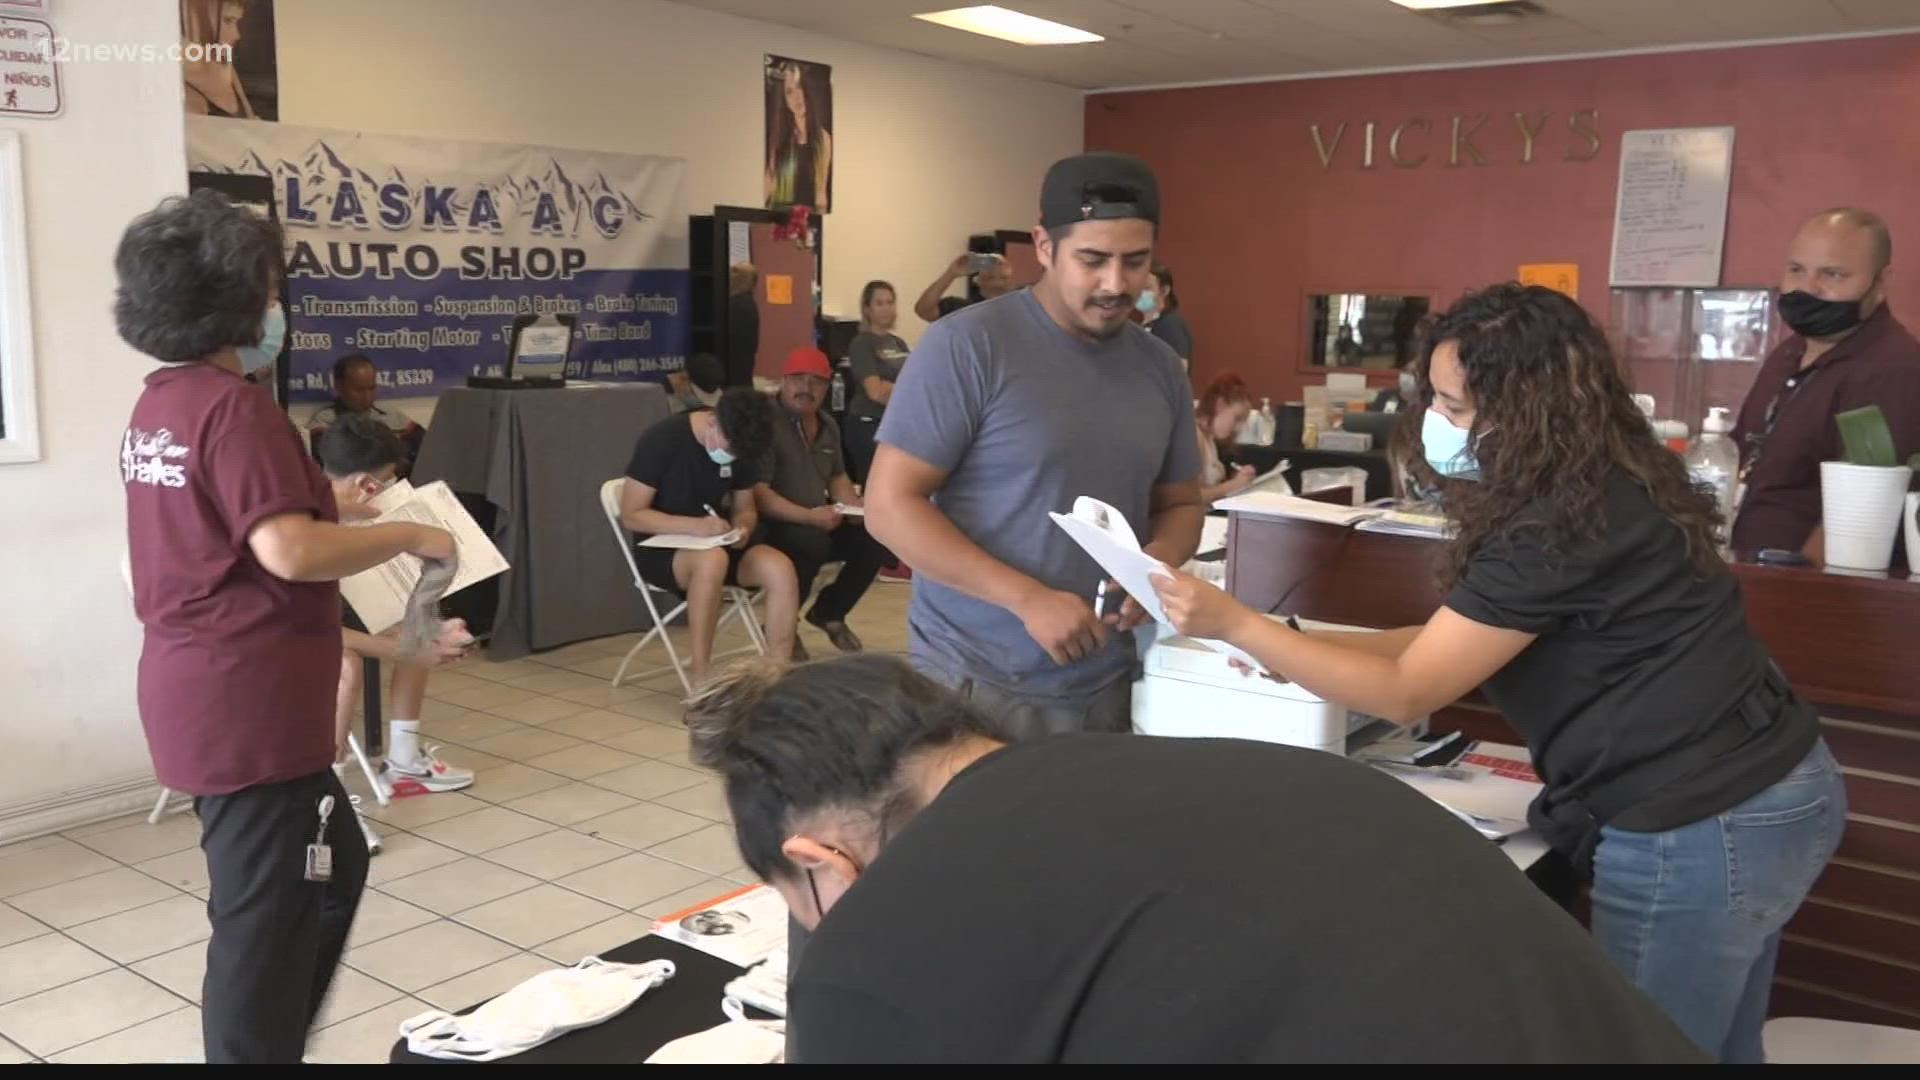 A Phoenix beauty salon transformed into a COVID-19 vaccination distribution site, in an effort to increase immunization numbers among the Latino community.